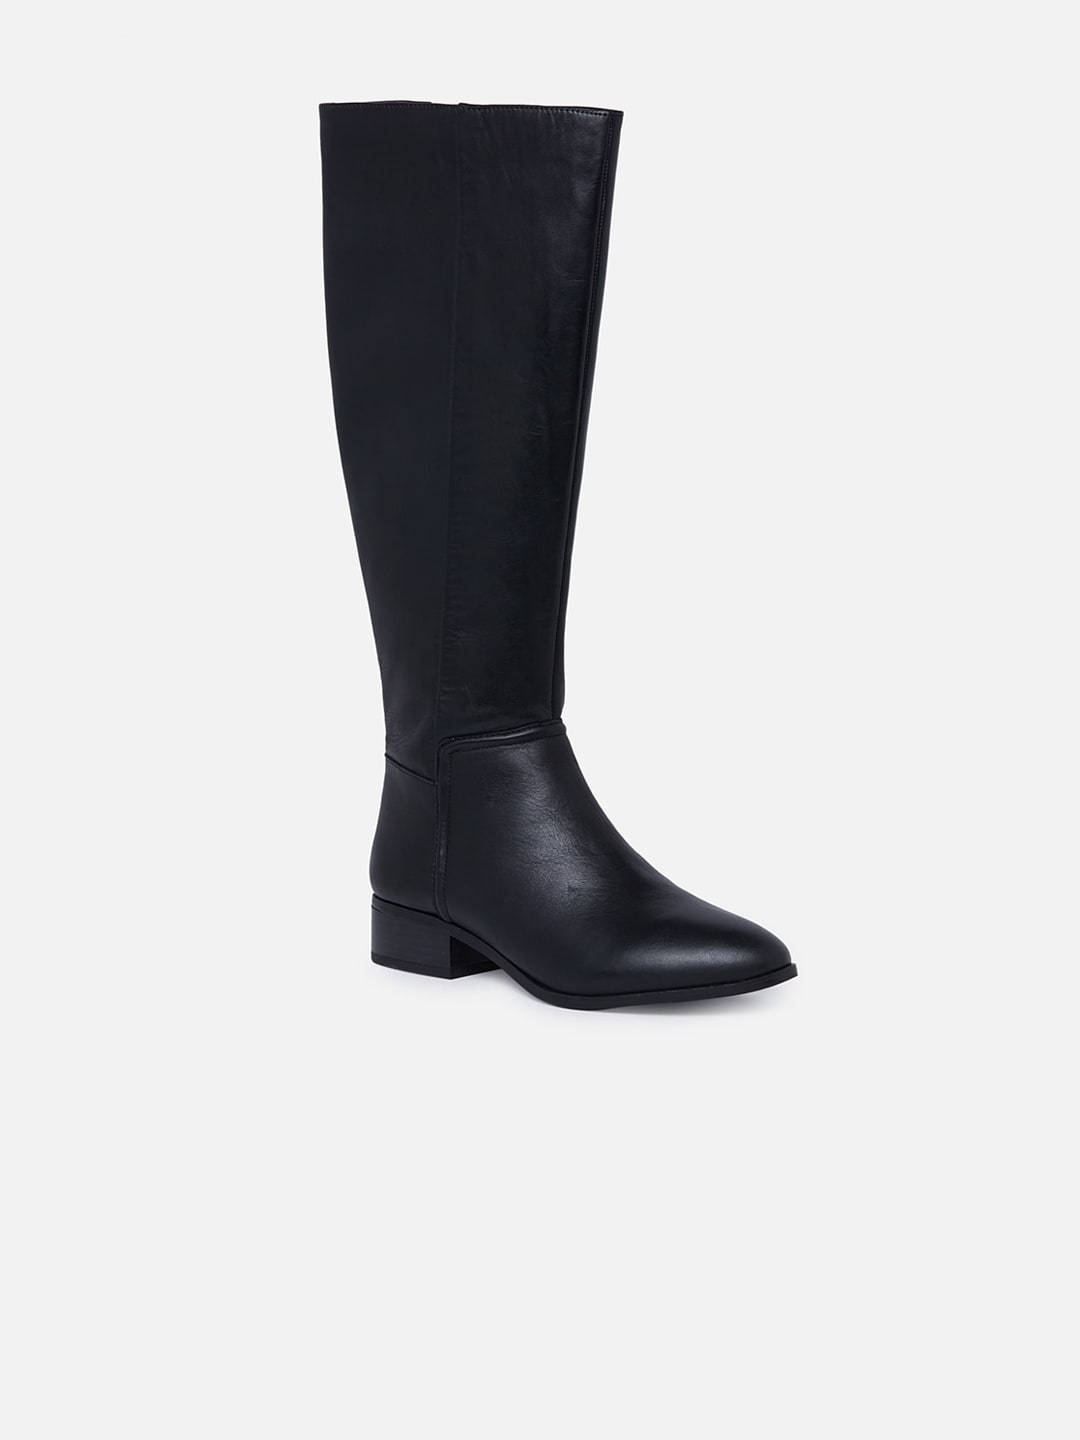 ALDO Women Black Solid Heeled Boots Price in India